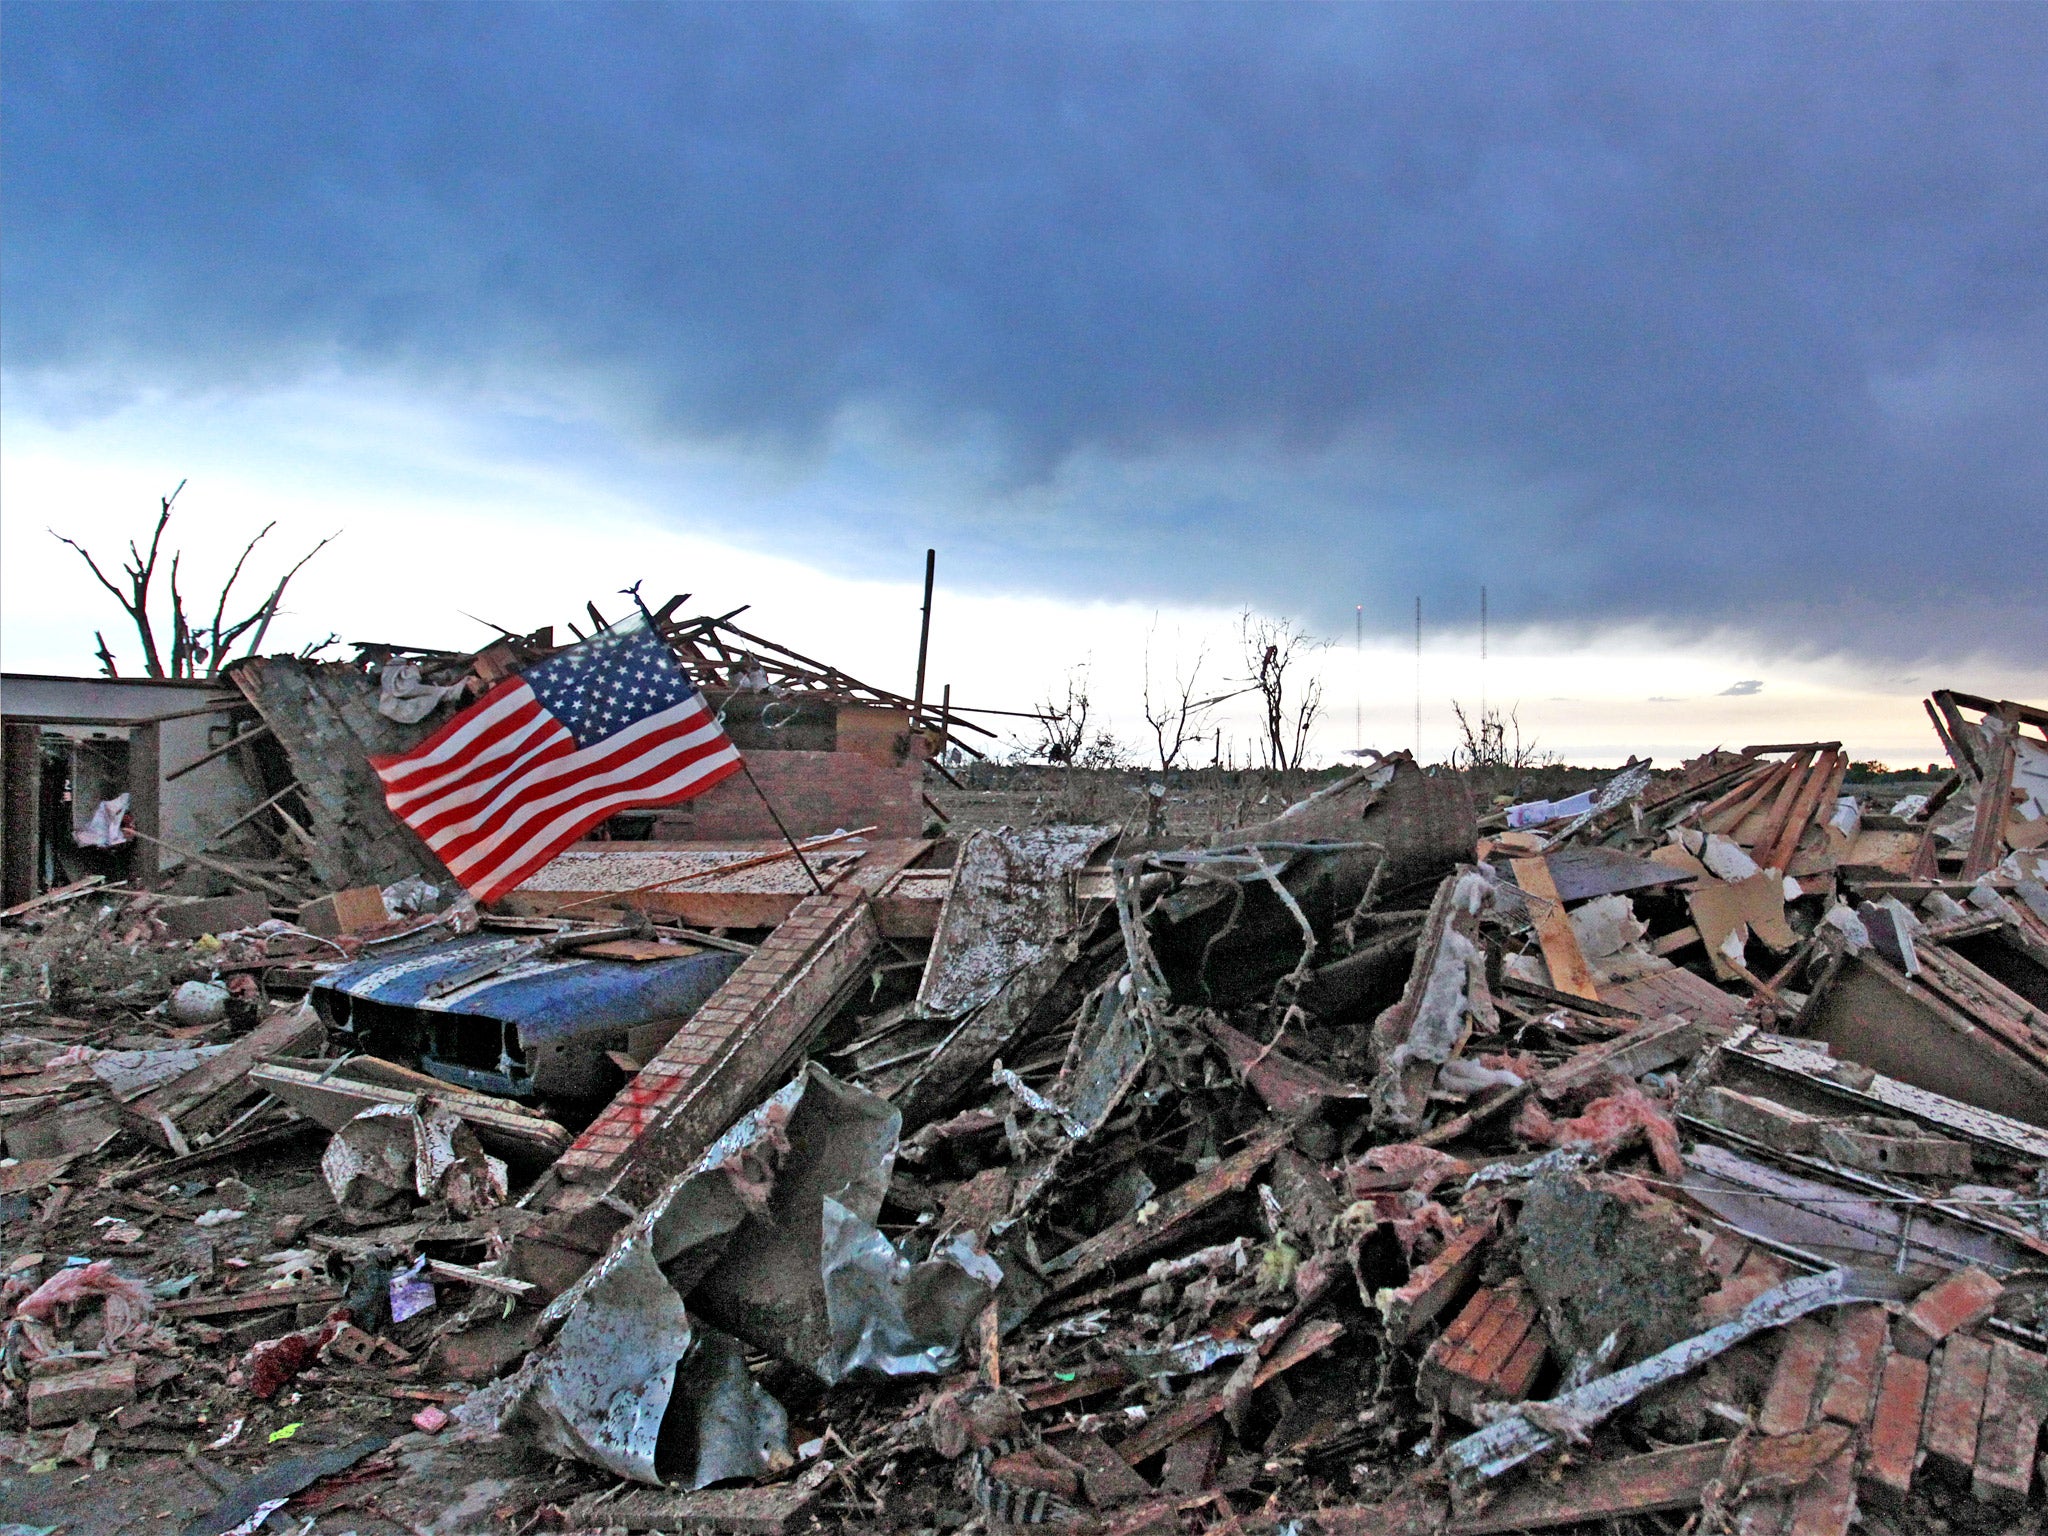 An American flag blows in the wind at sunrise atop the rubble of a destroyed home